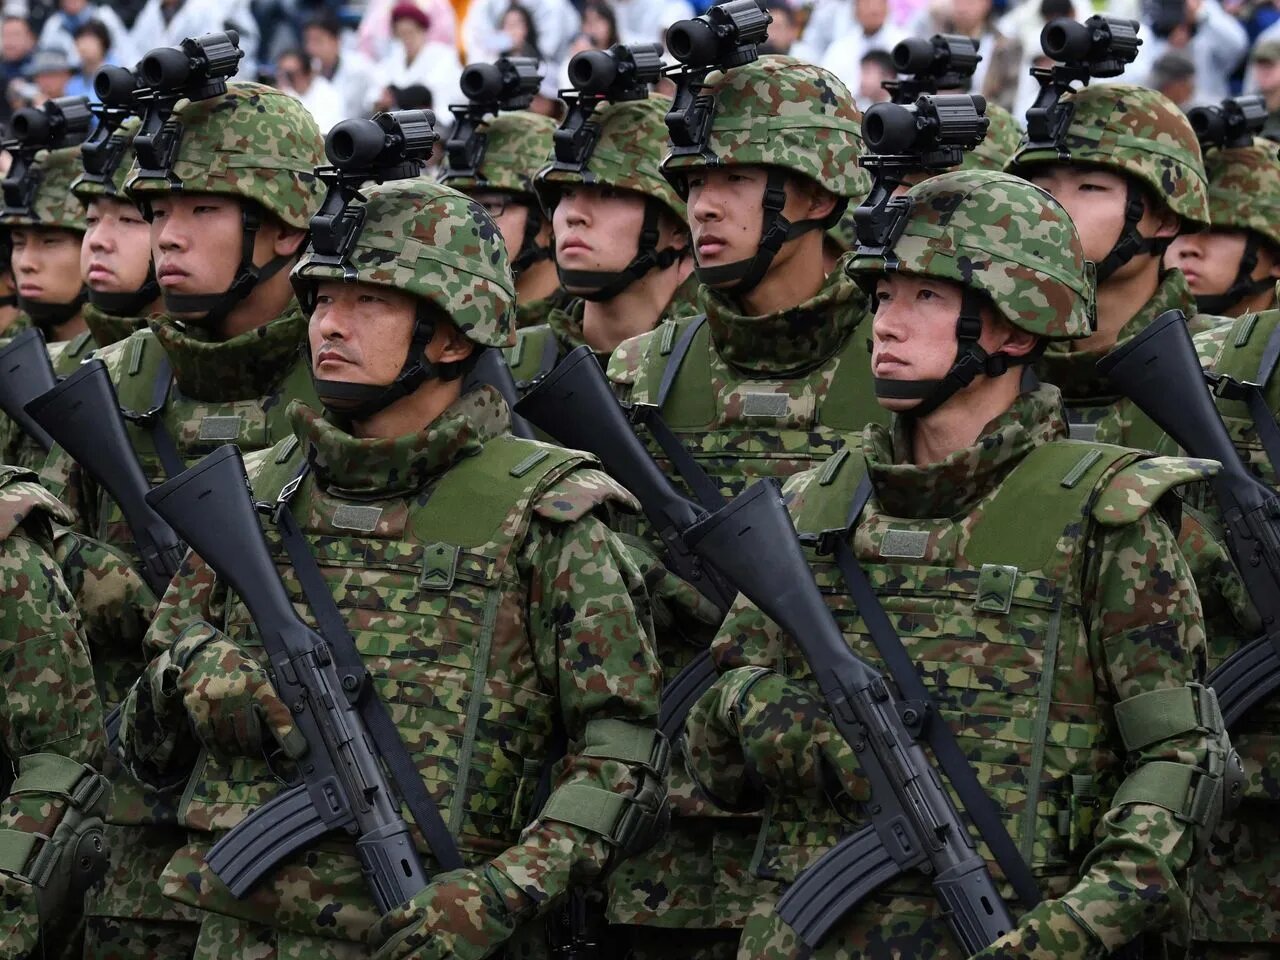 Japan To Offer Military Assistance To Like-Minded Nations To Counter China